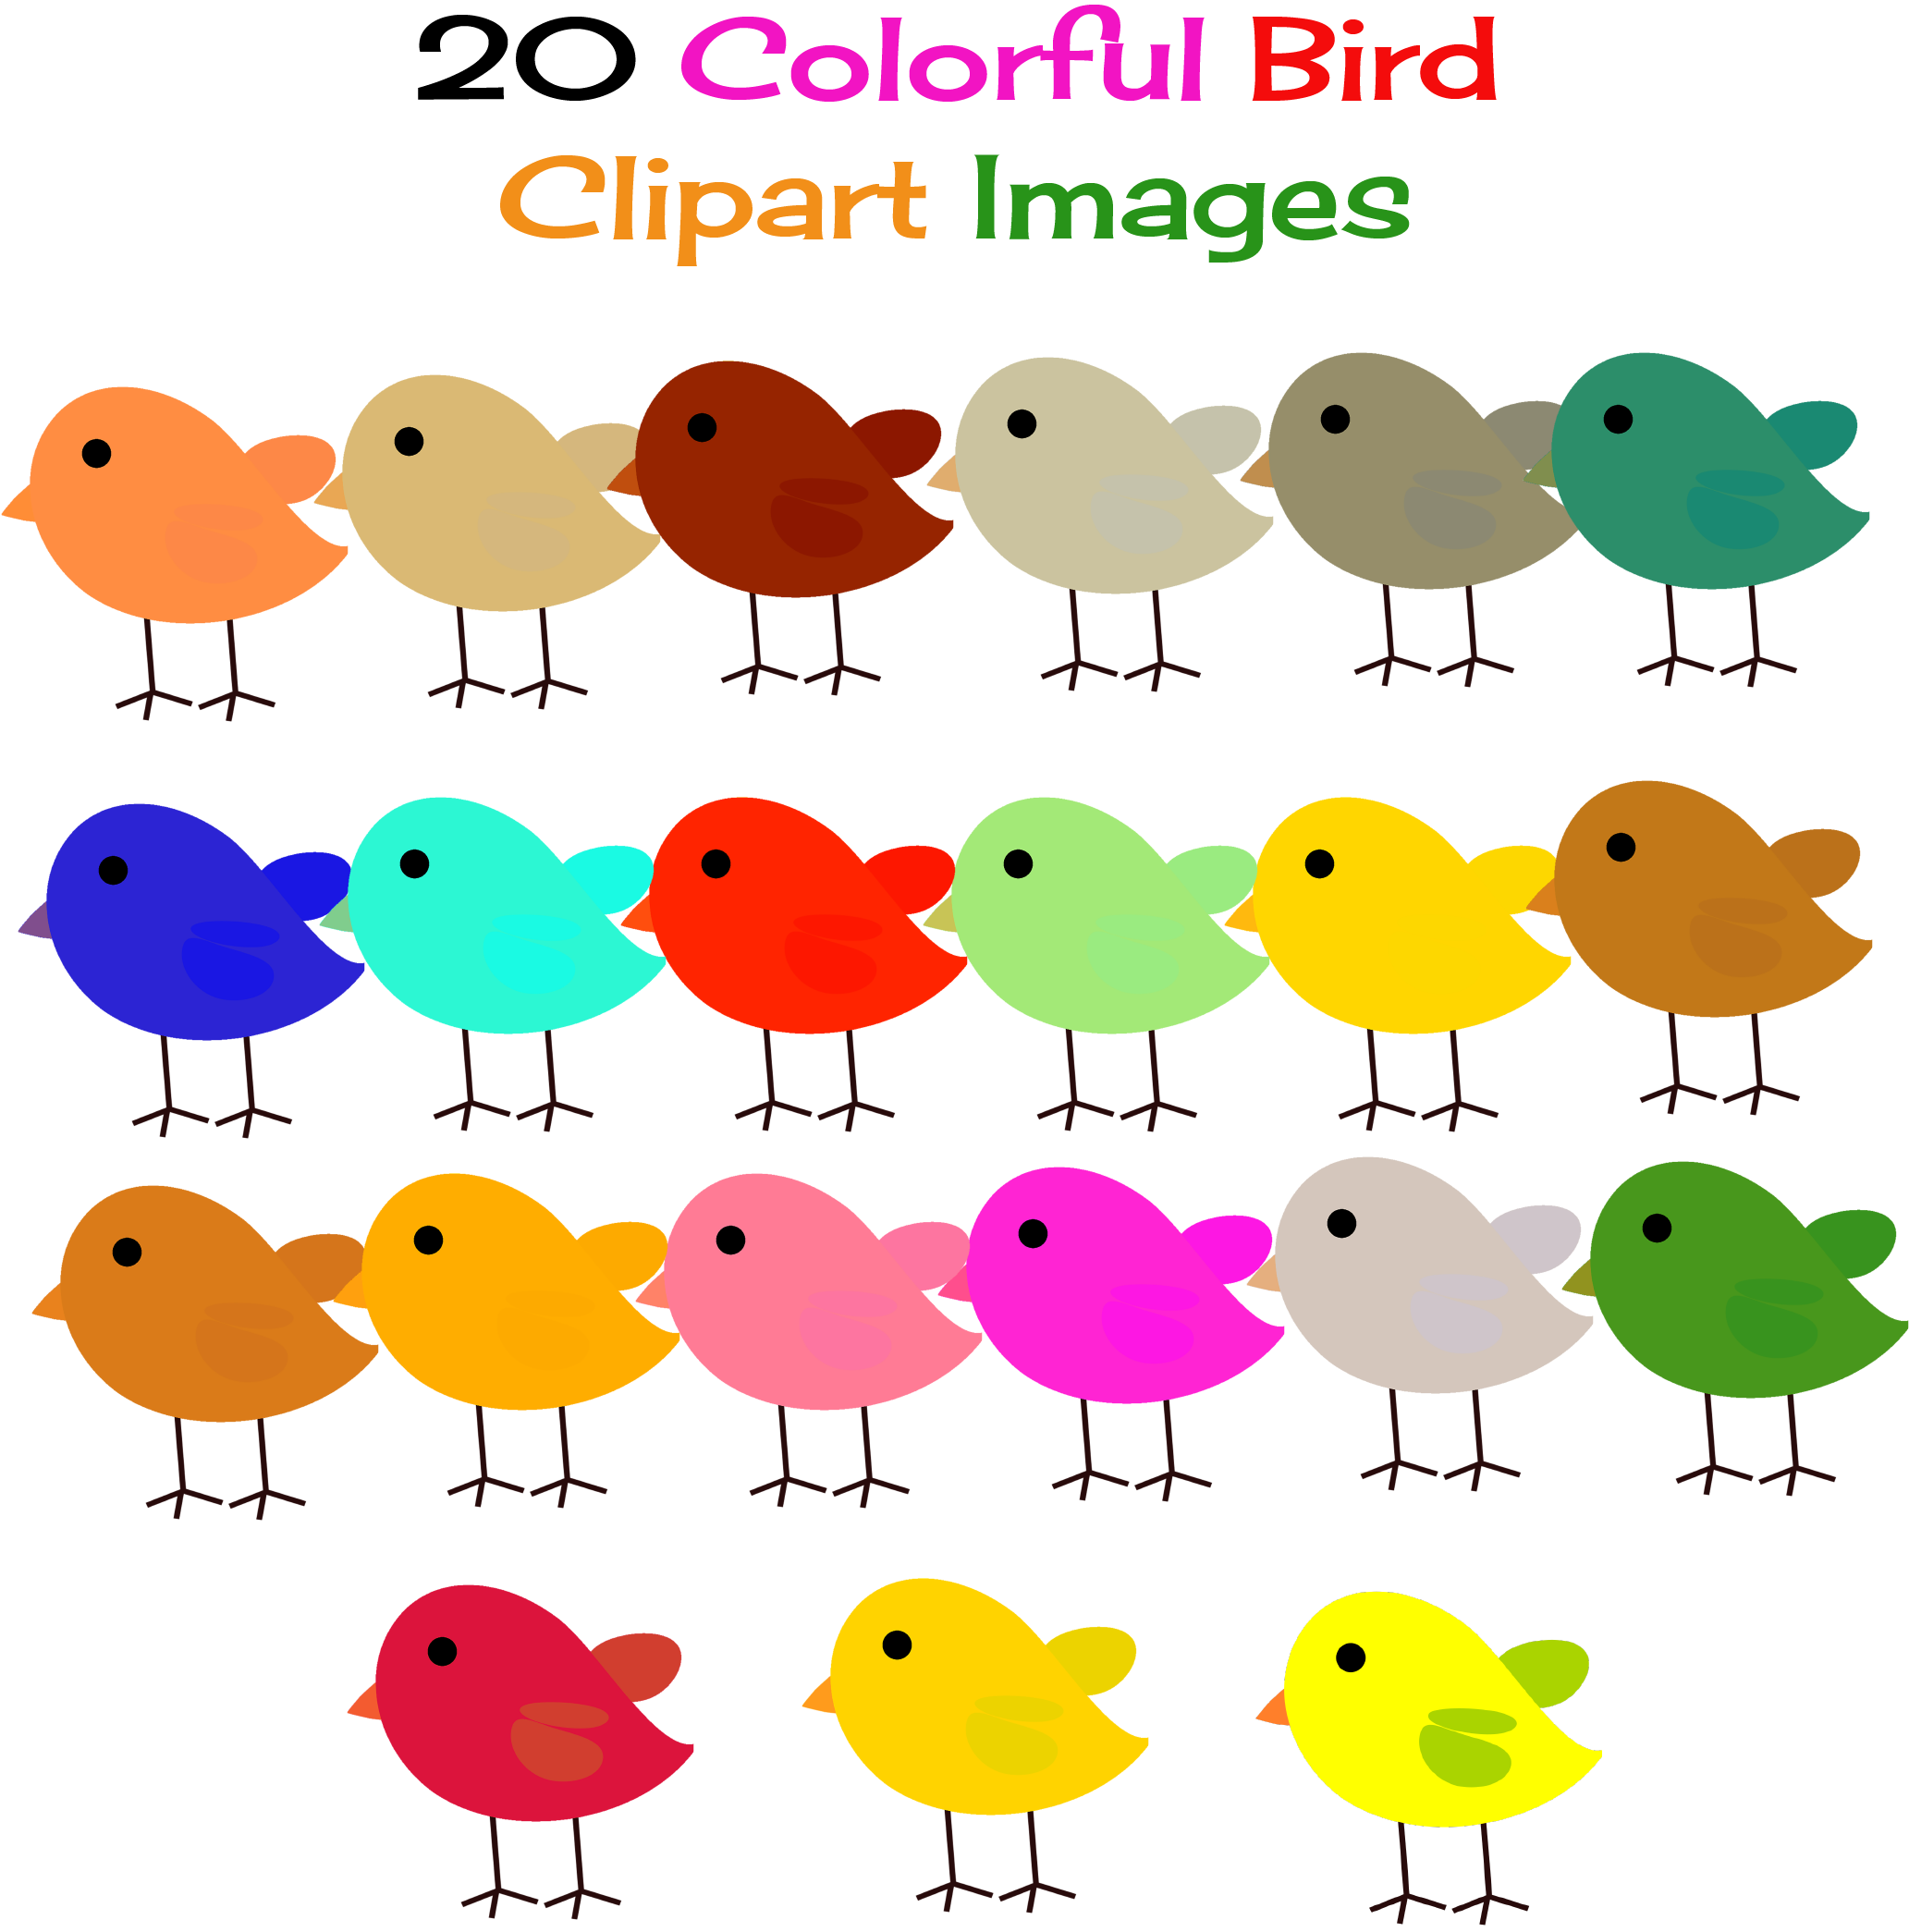 colorful bird clipart